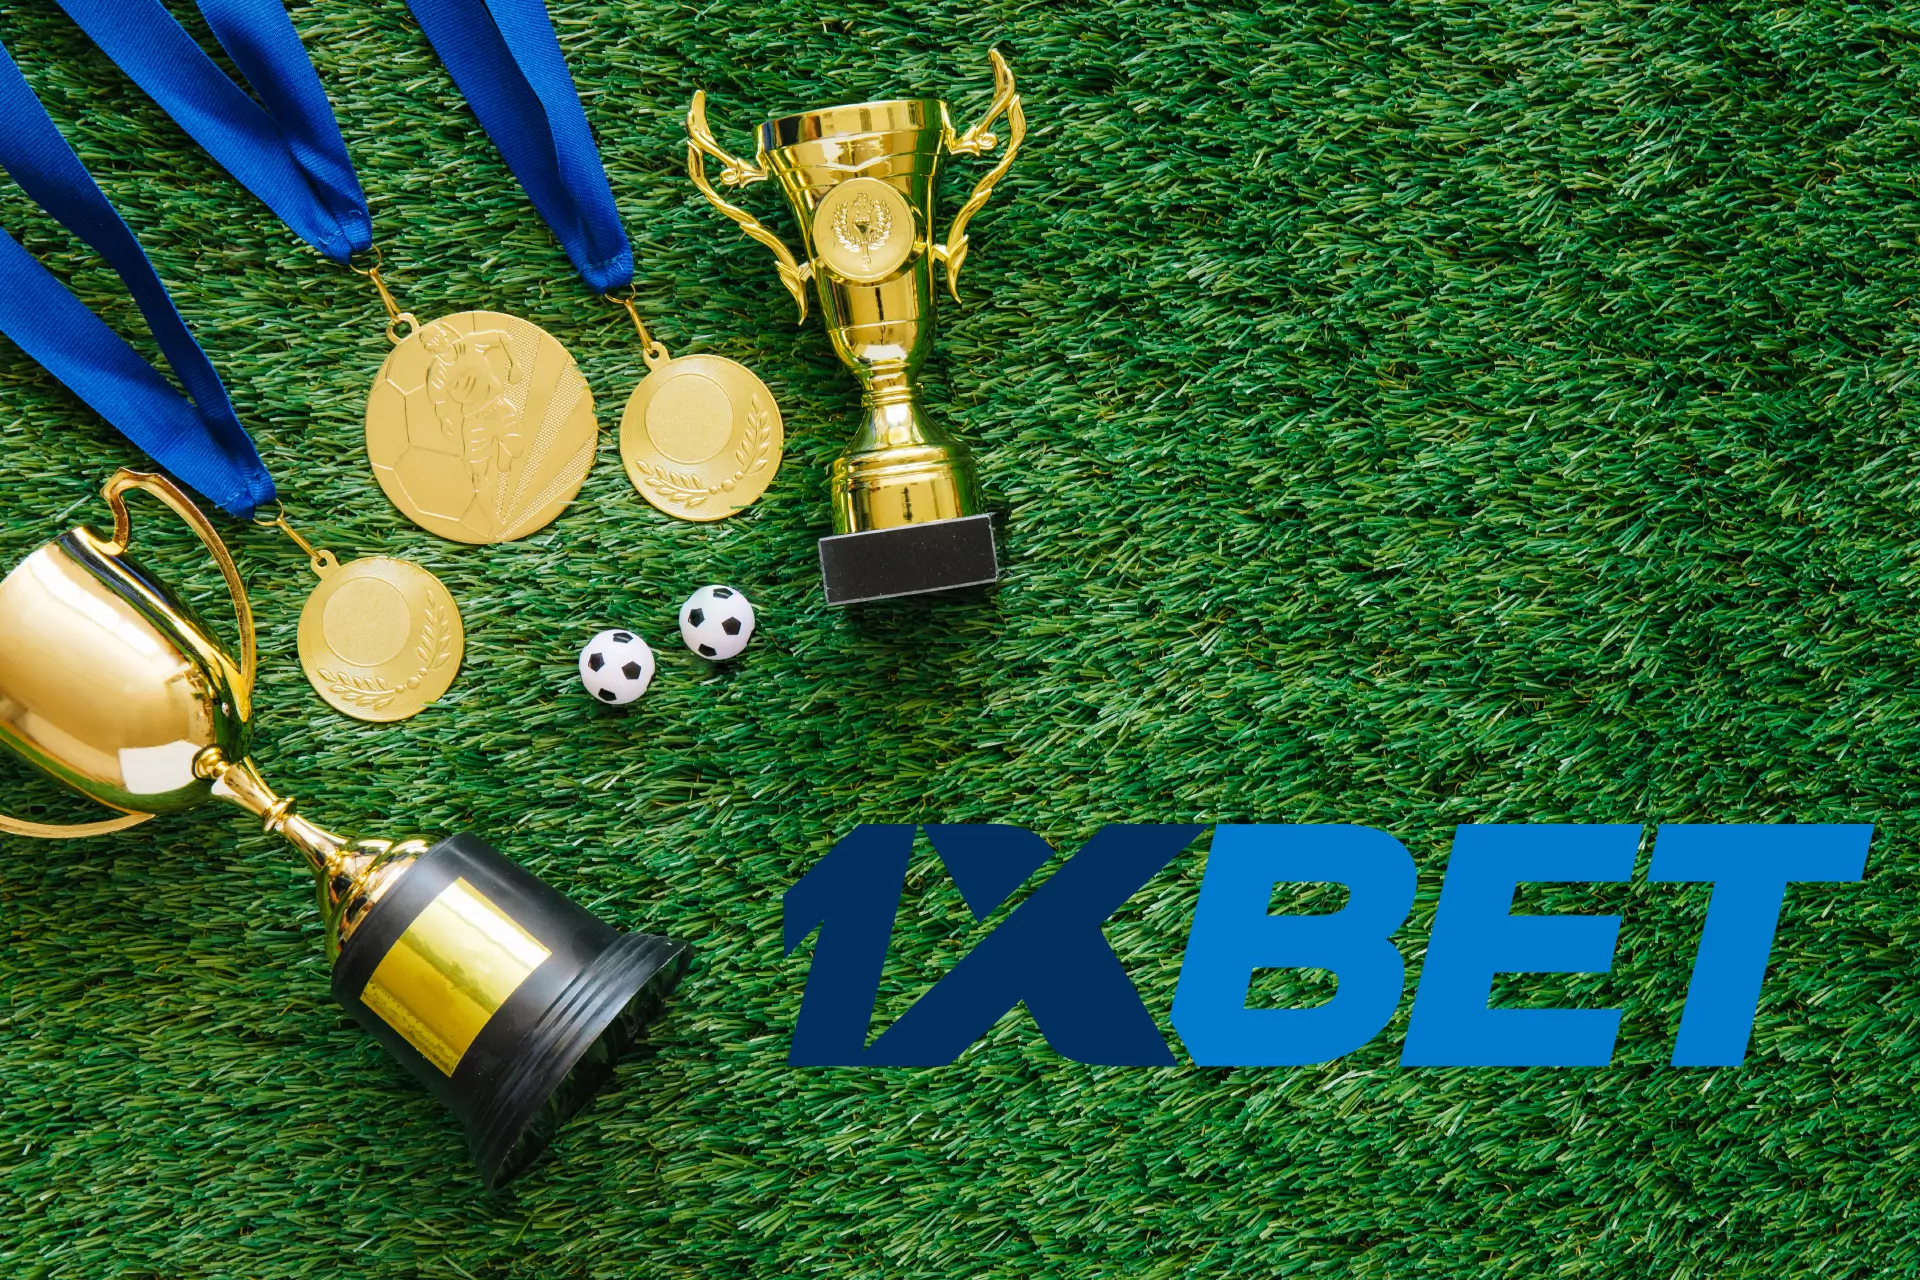 During the Champions League 1xBet offers special bonuses for betting on soccer.